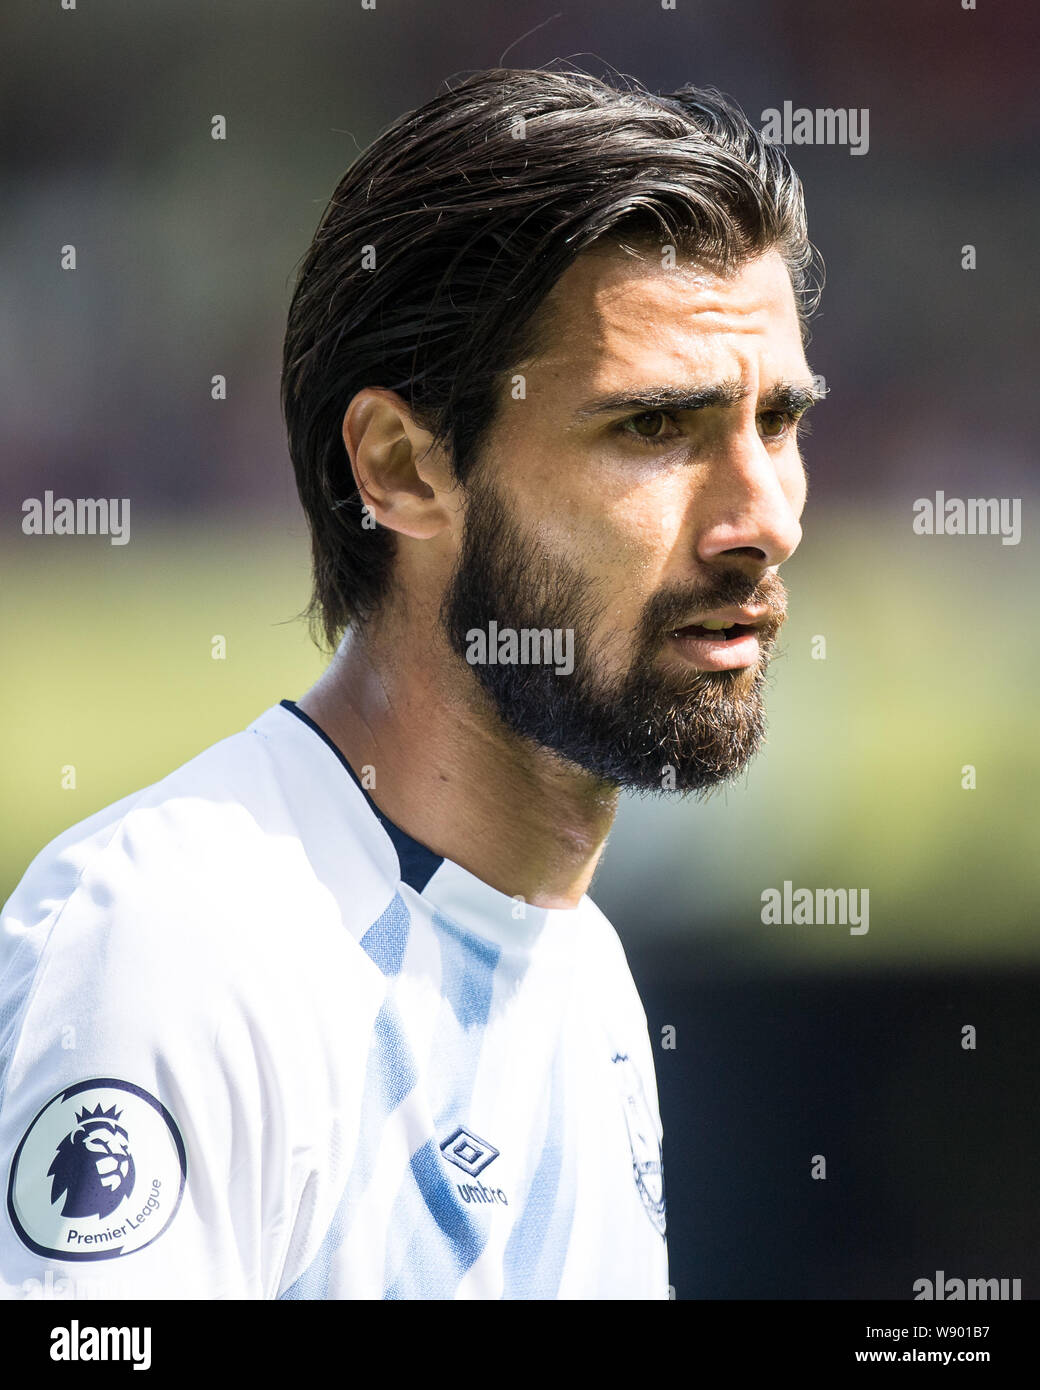 LONDON ENGLAND  AUGUST 10 Andre Gomes of Everton FC looks on during the  Premier League match between Crystal Palace and Everton FC at Selhurst Park  on August 10 2019 in London